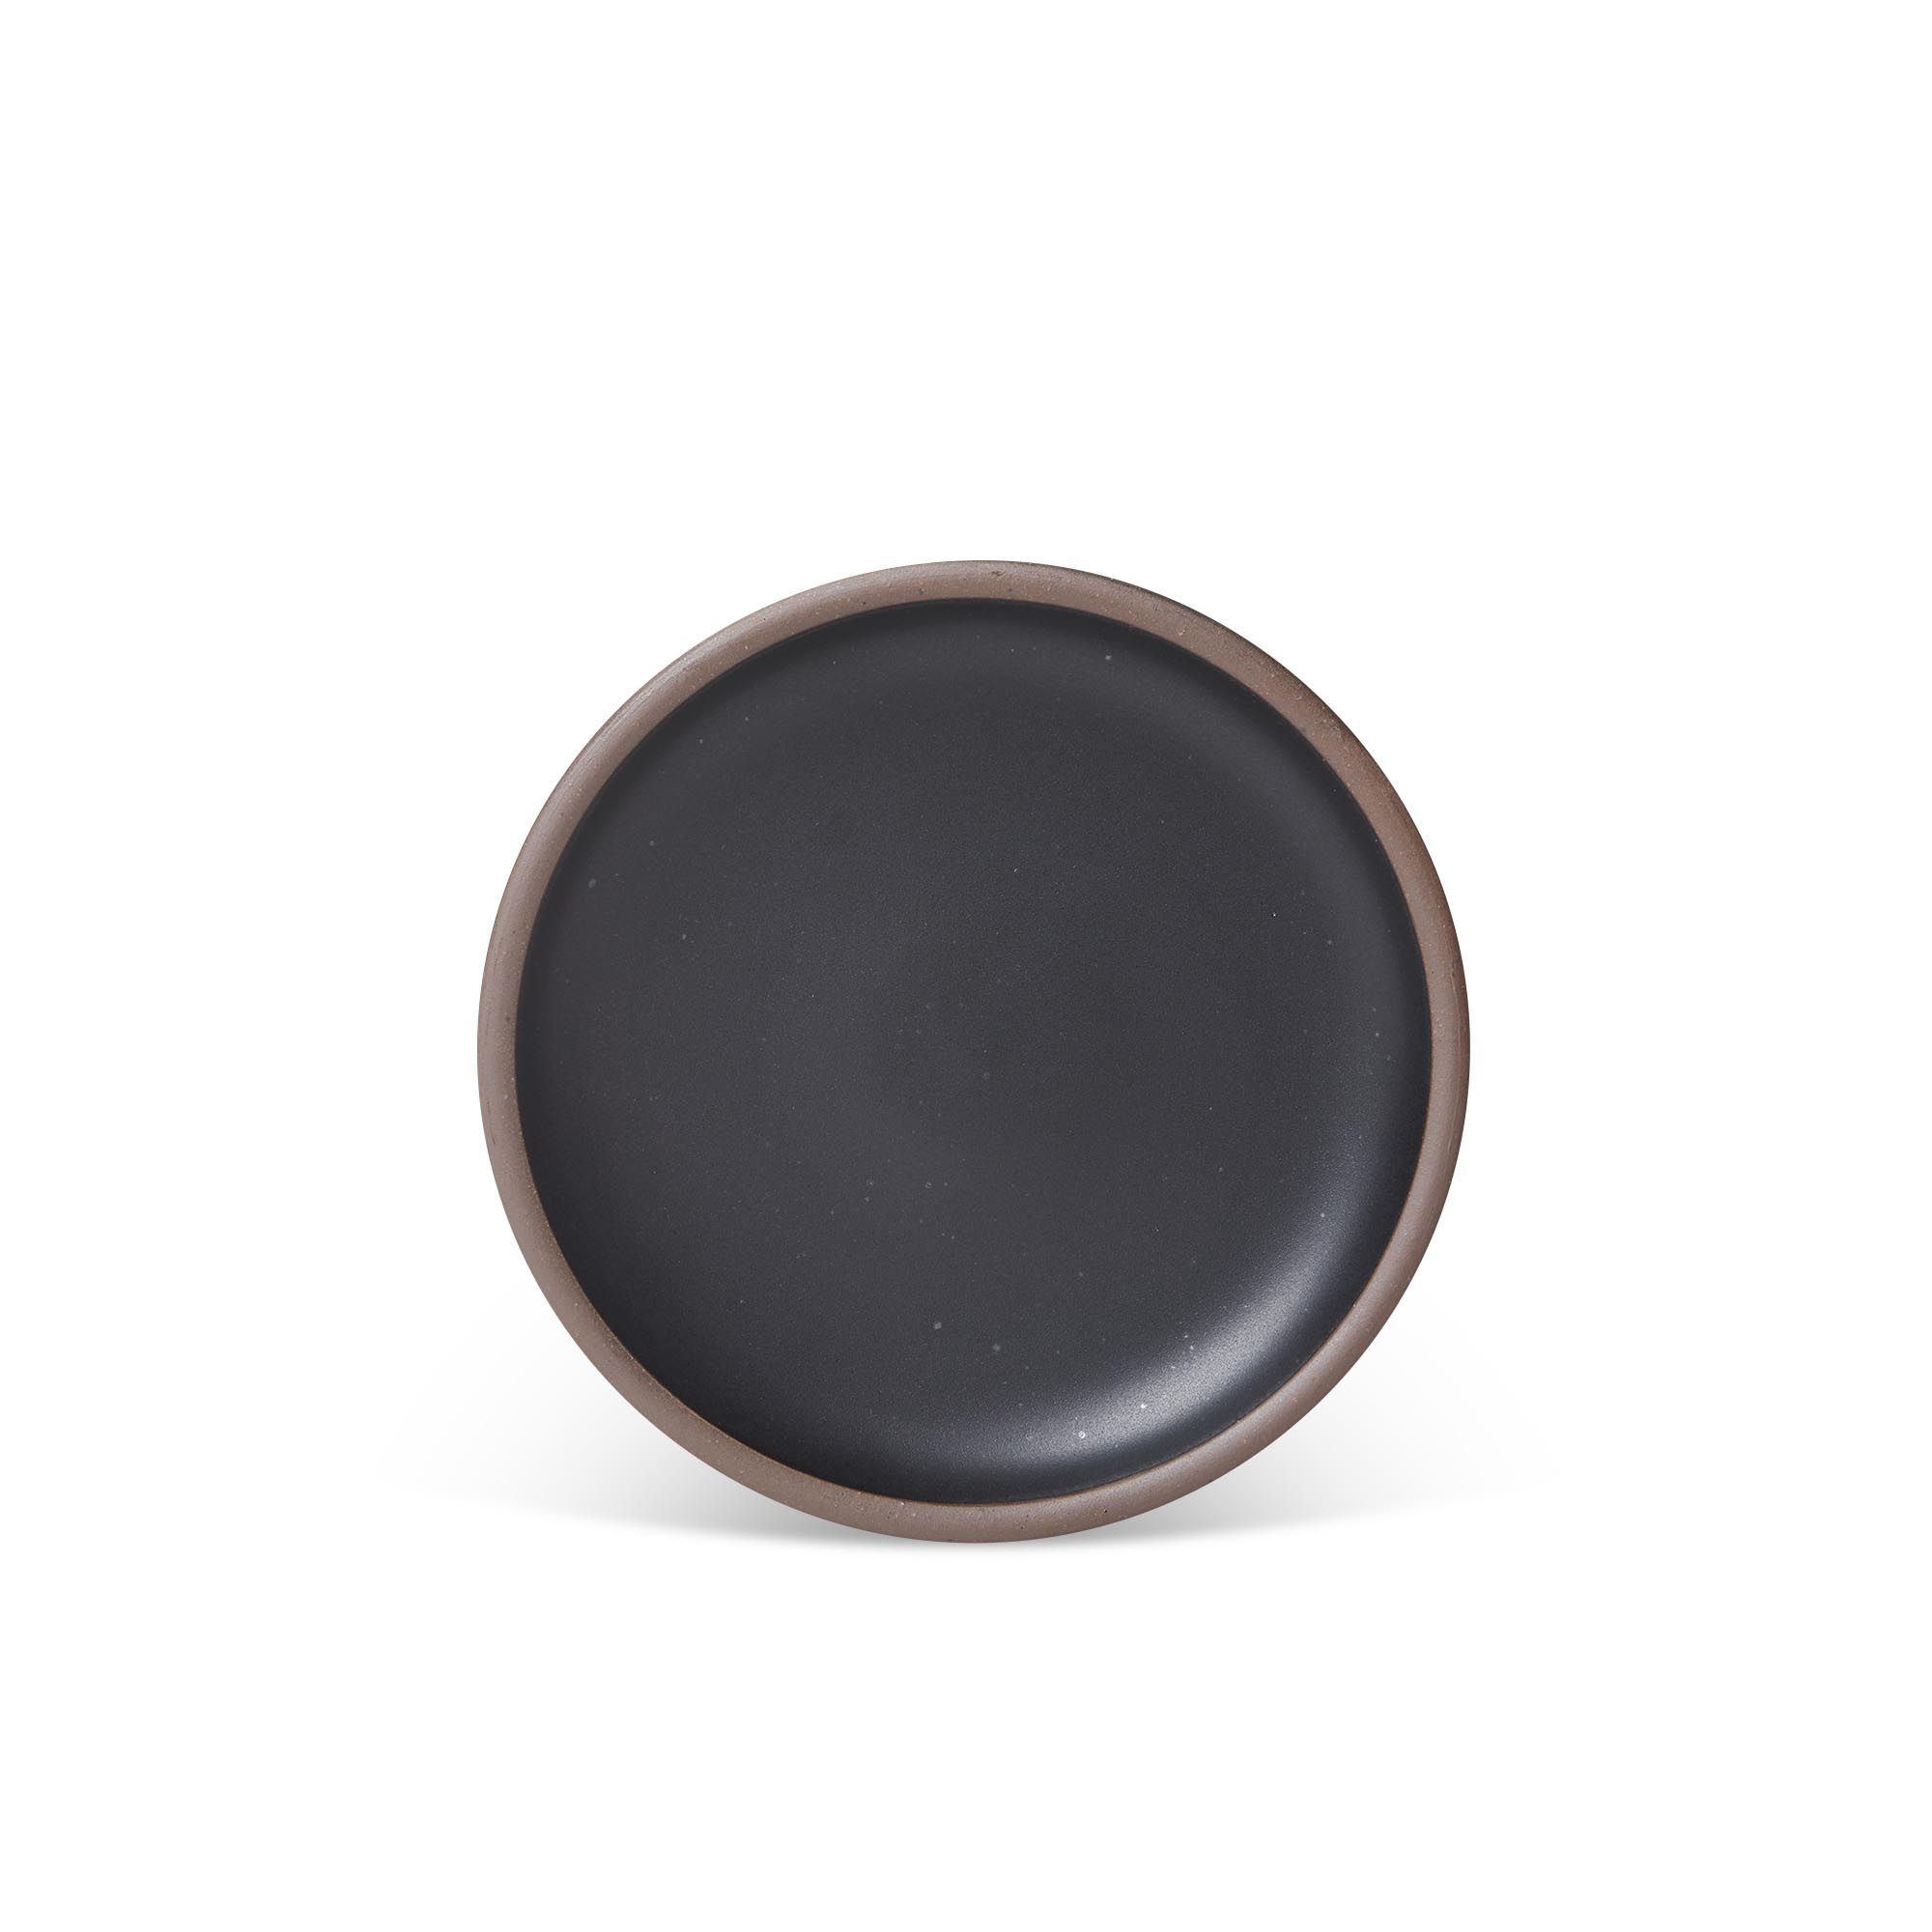 A medium sized ceramic plate in a graphite black color featuring iron speckles and an unglazed rim.